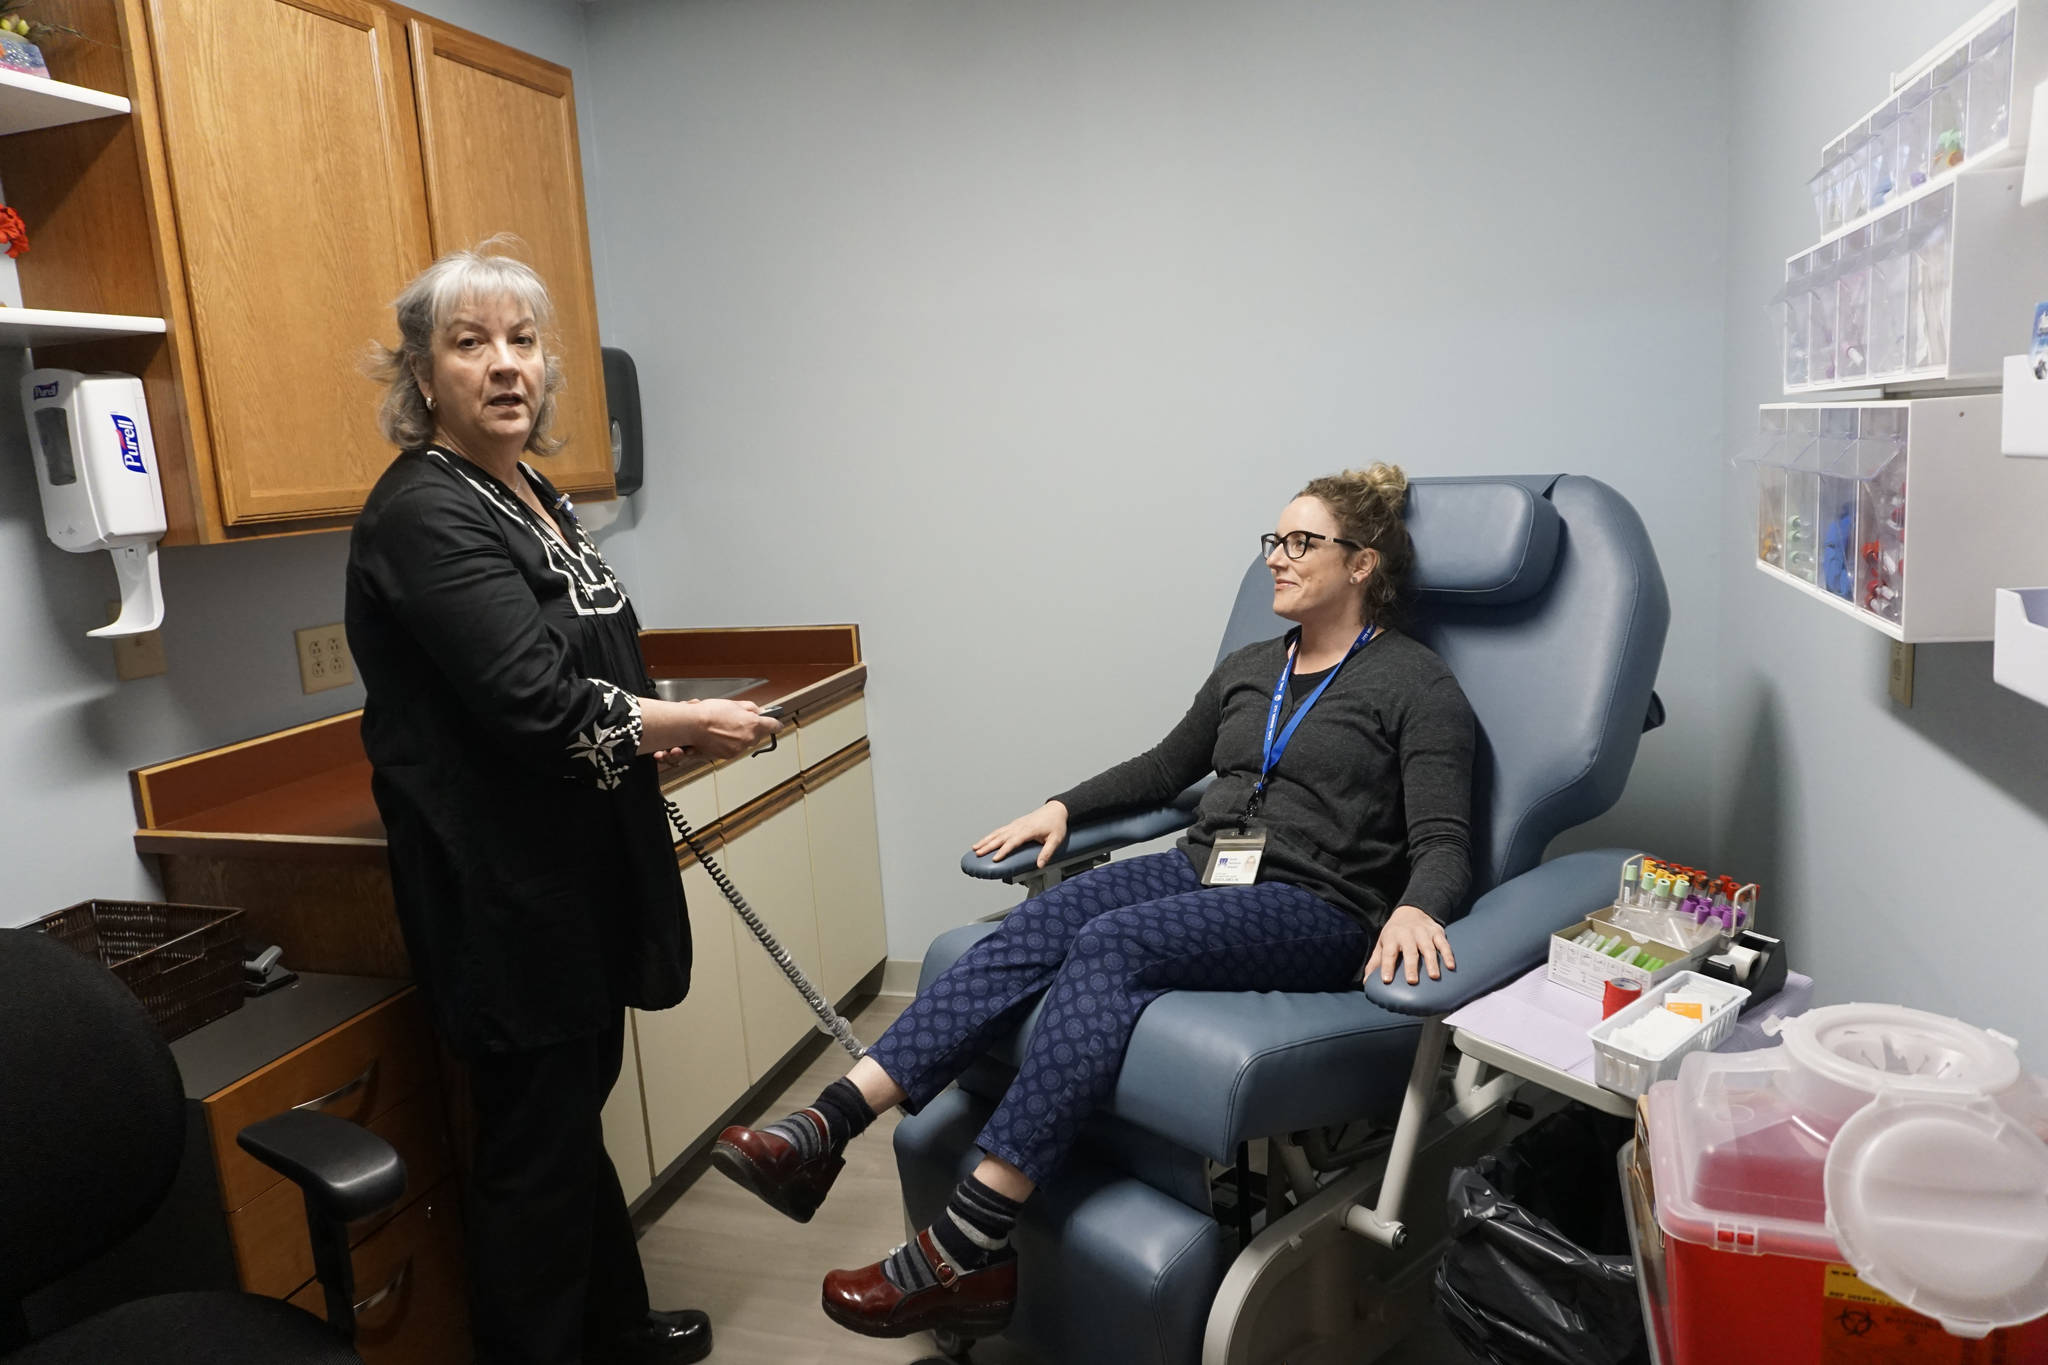 Homer Medical Center phlebotomist Peggie Inglis, left, demonstrates the new blood-draw chair with fellow phlebotomist Jessica James, right, at an open house for the expanded and remodeled clinic last Friday, March 30, 2018 on Bartlett Street in Homer, Alaska. (Photo by Michael Armstrong, Homer News)